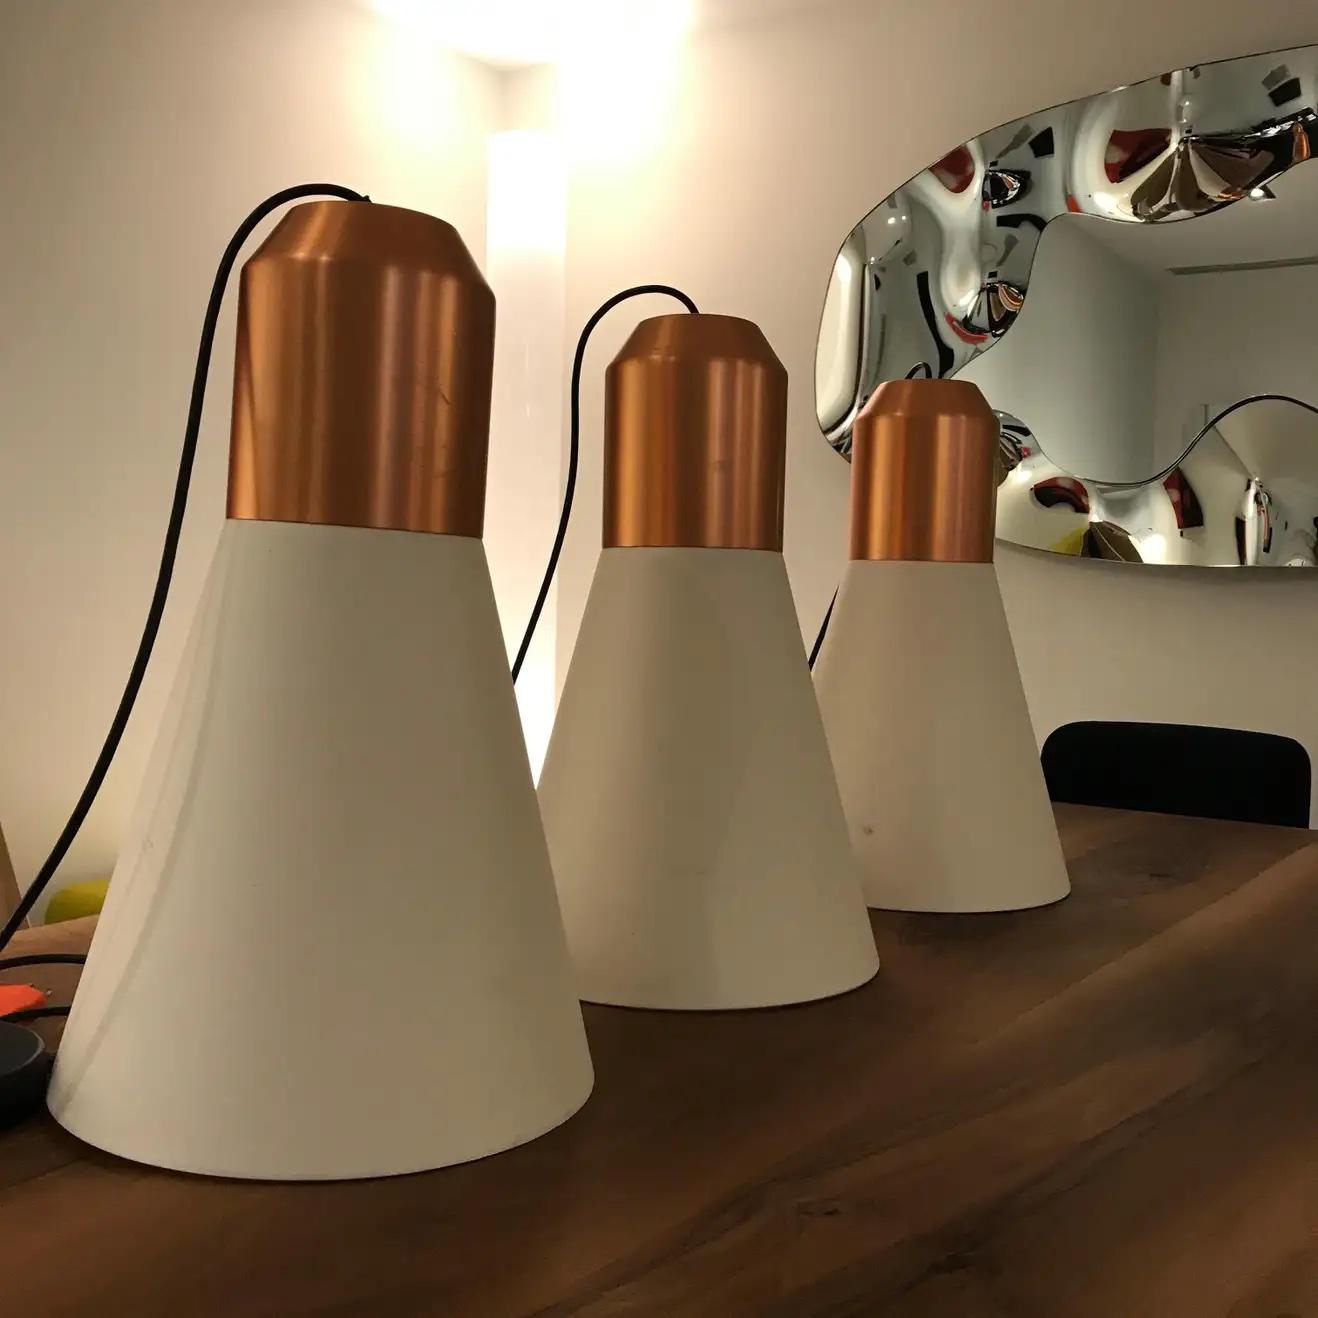 German Set of Three ClassiCon Bell Pendant Lamps Copper Top by Sebastian Herkner STOCK For Sale